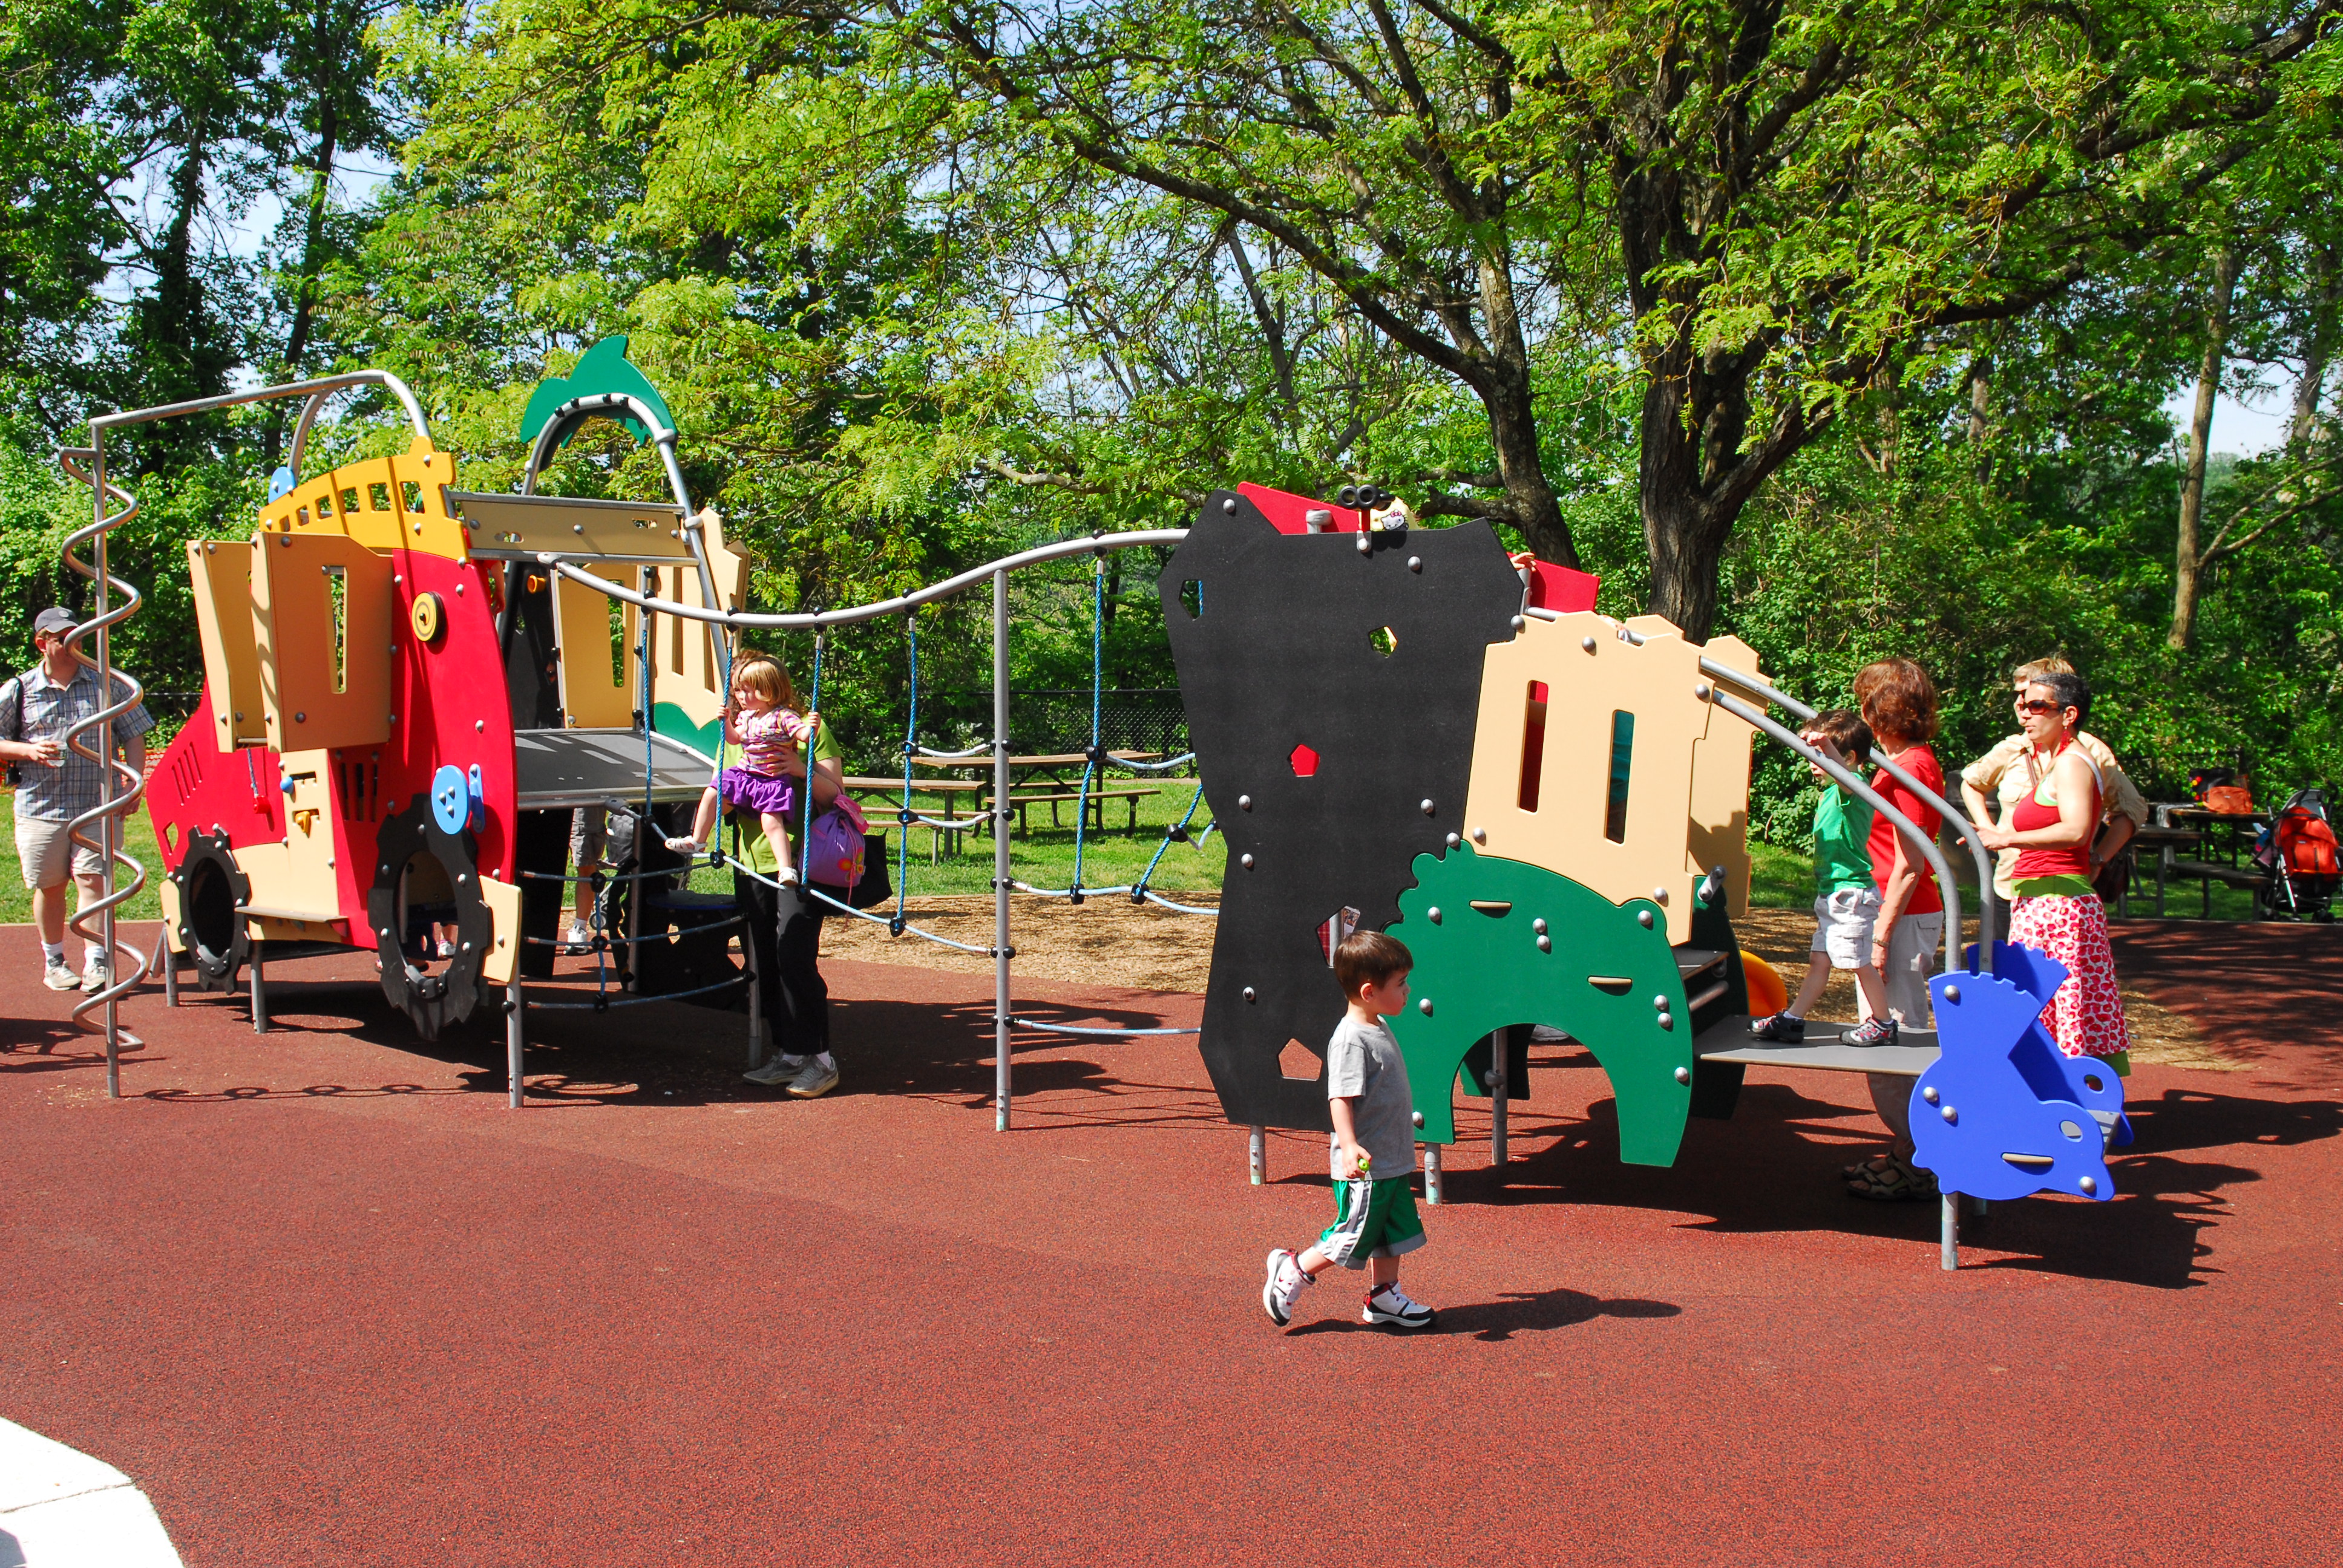 A playground structure at Glen Echo Park with several children playing on it.